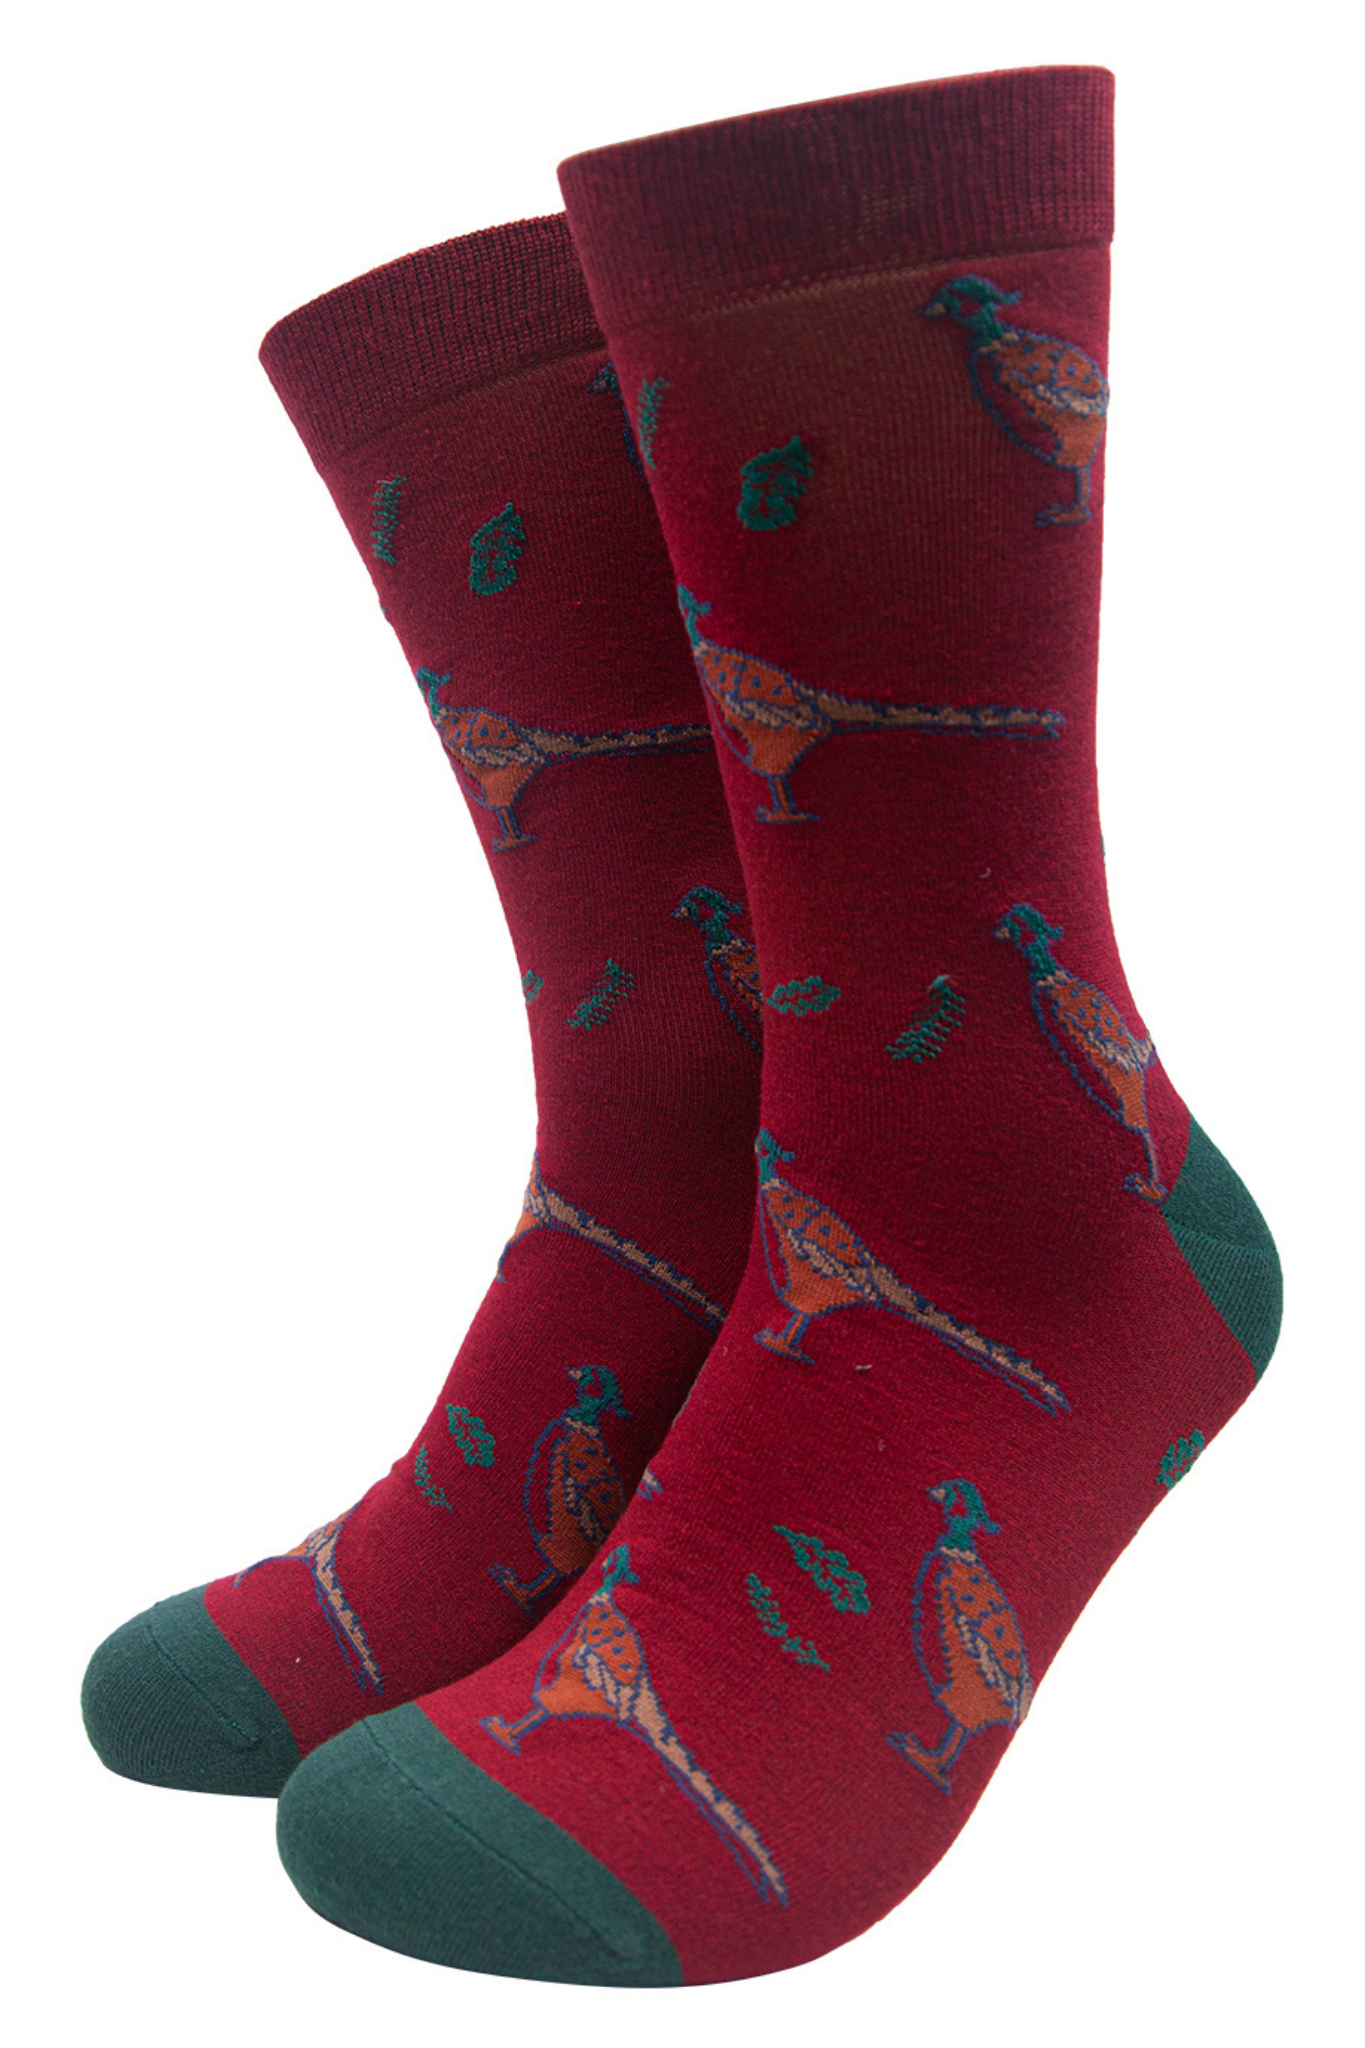 red dress socks with woodland pheasants and autumn leaves